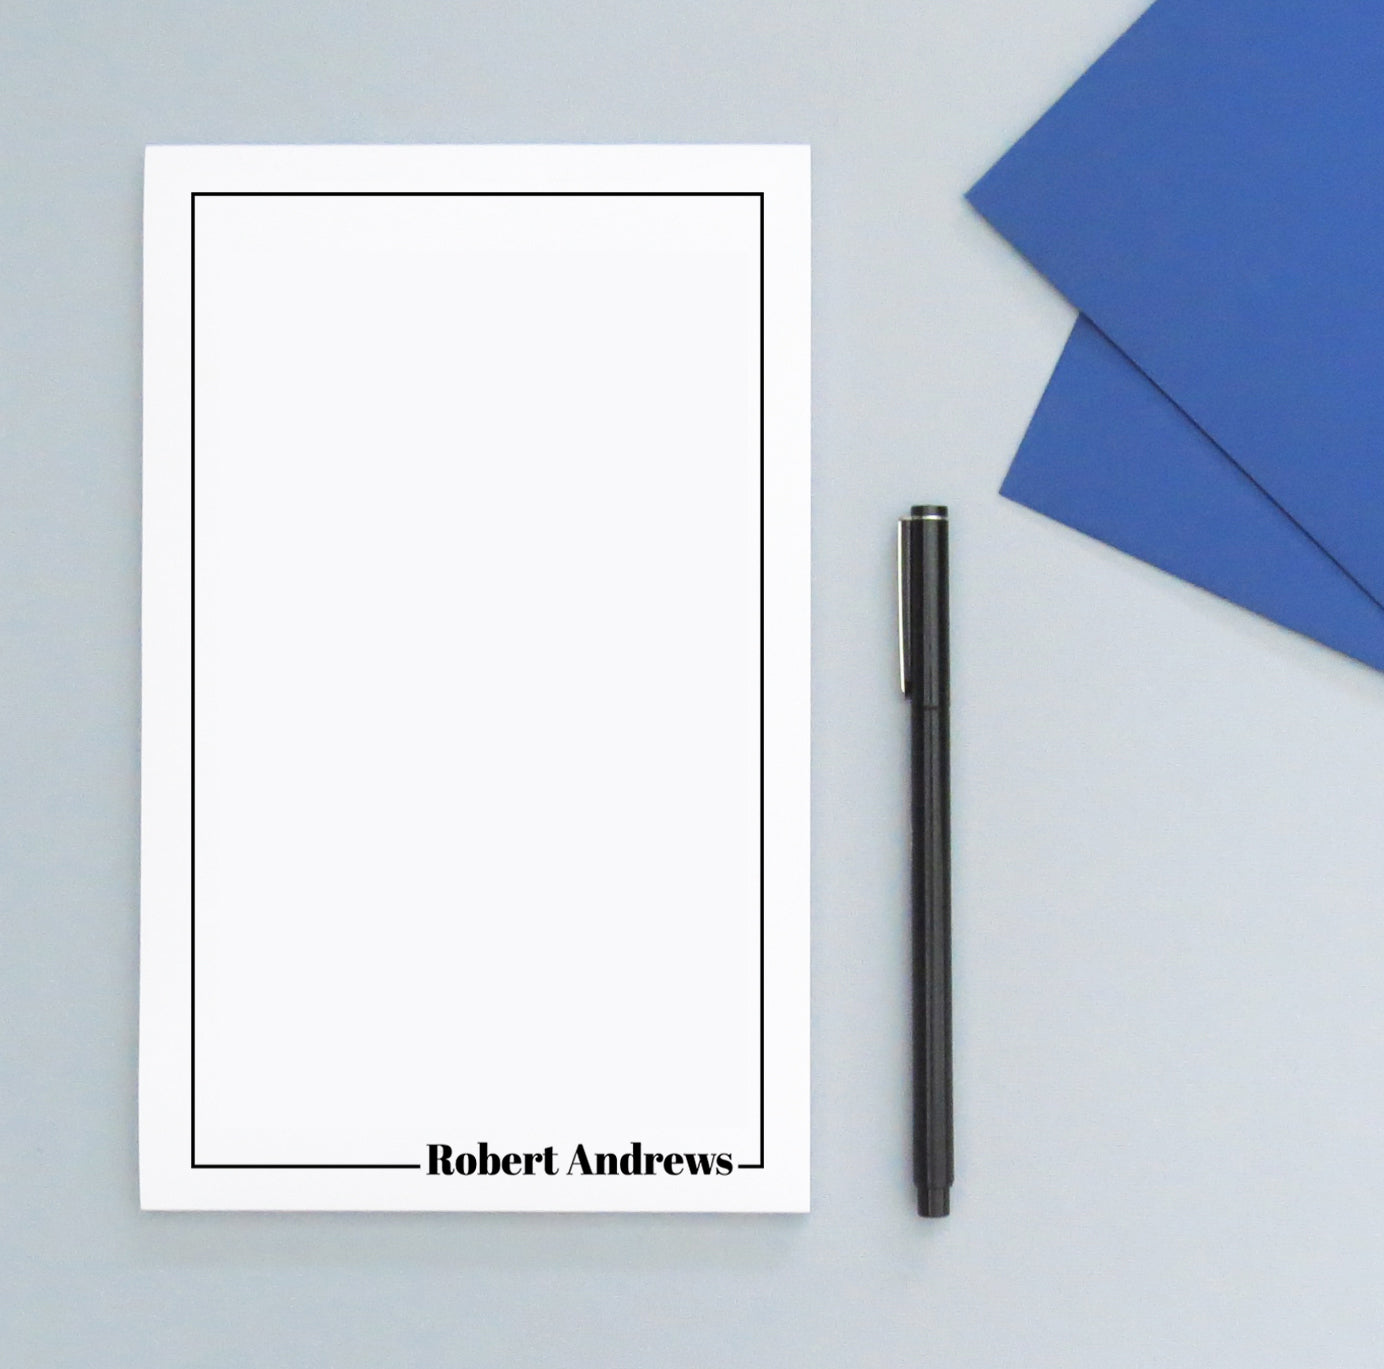 Modern Professional Customized Notepad Set For Adults